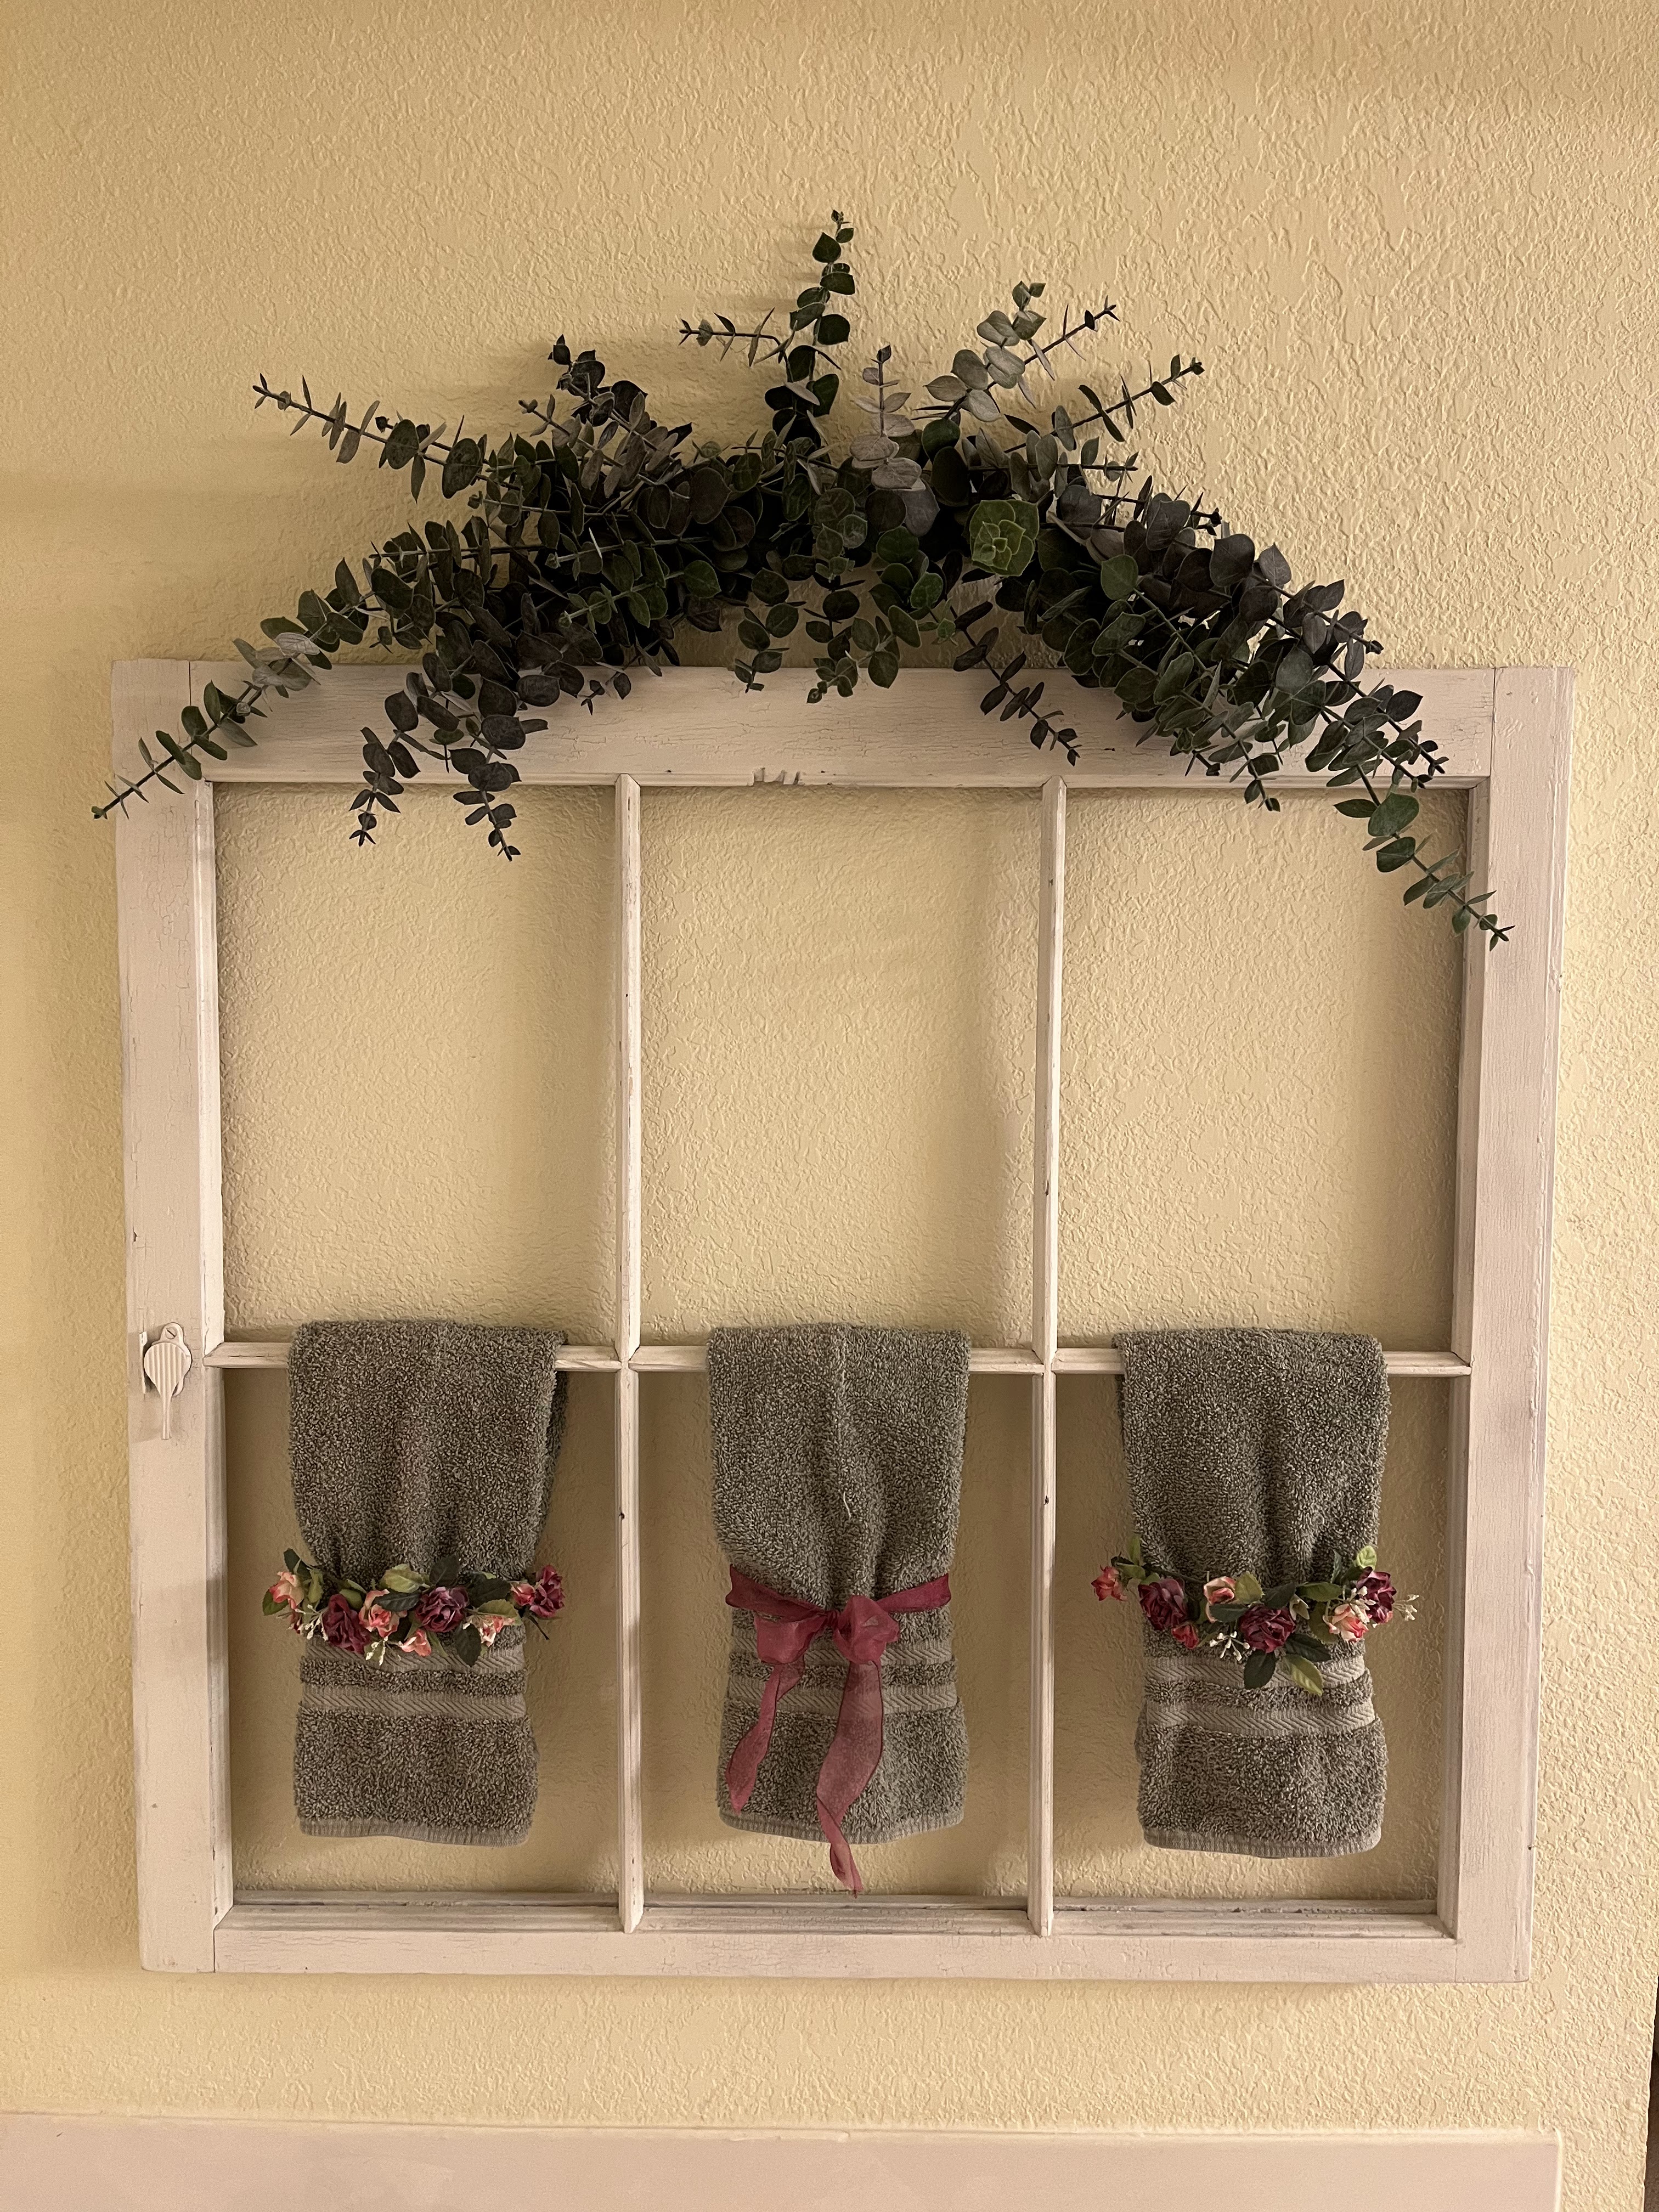 old window transformed into a new towel rack